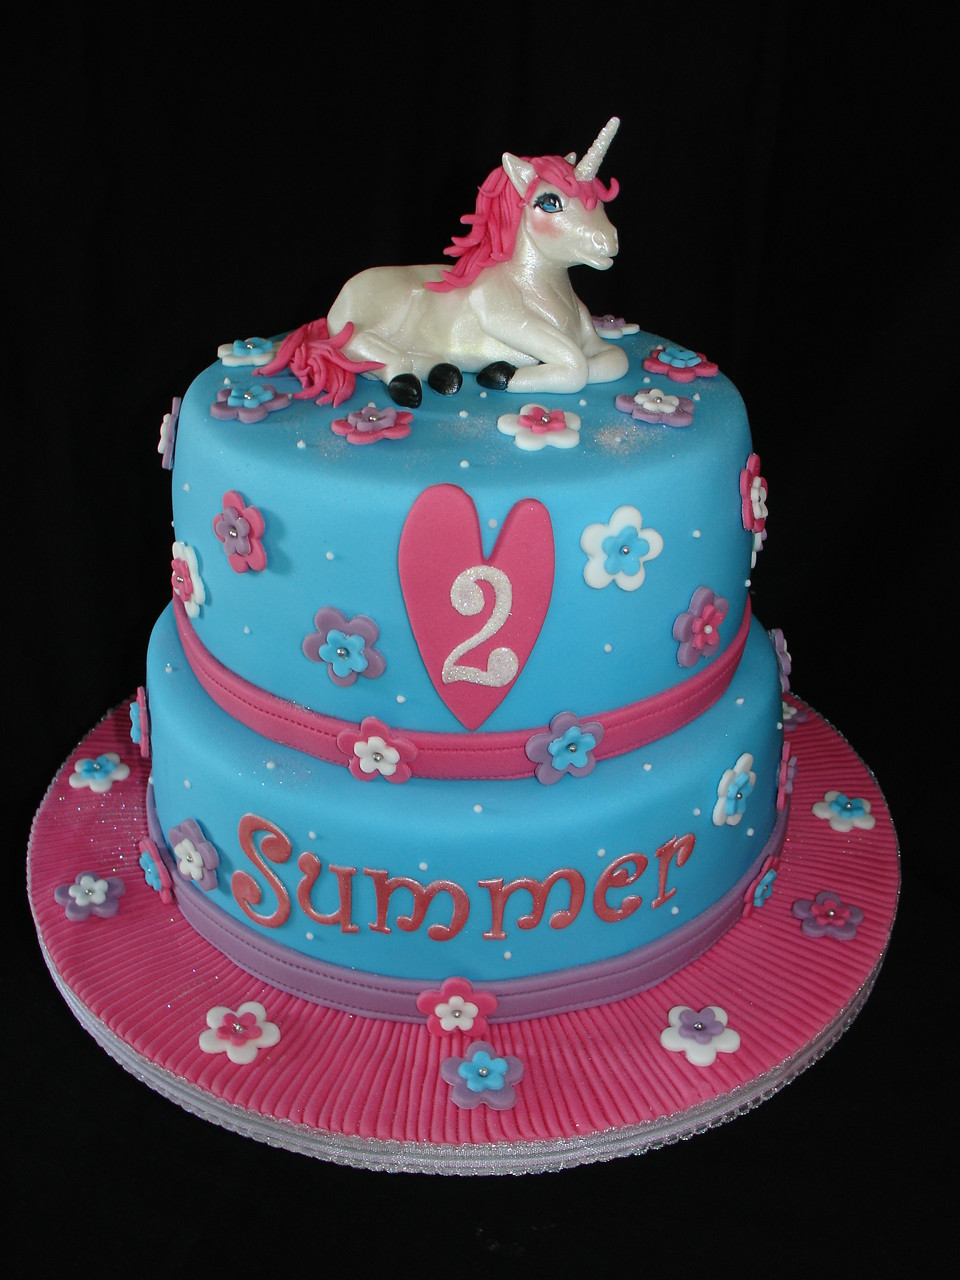 Pictures Of A Birthday Cake
 Unicorn Cakes – Decoration Ideas